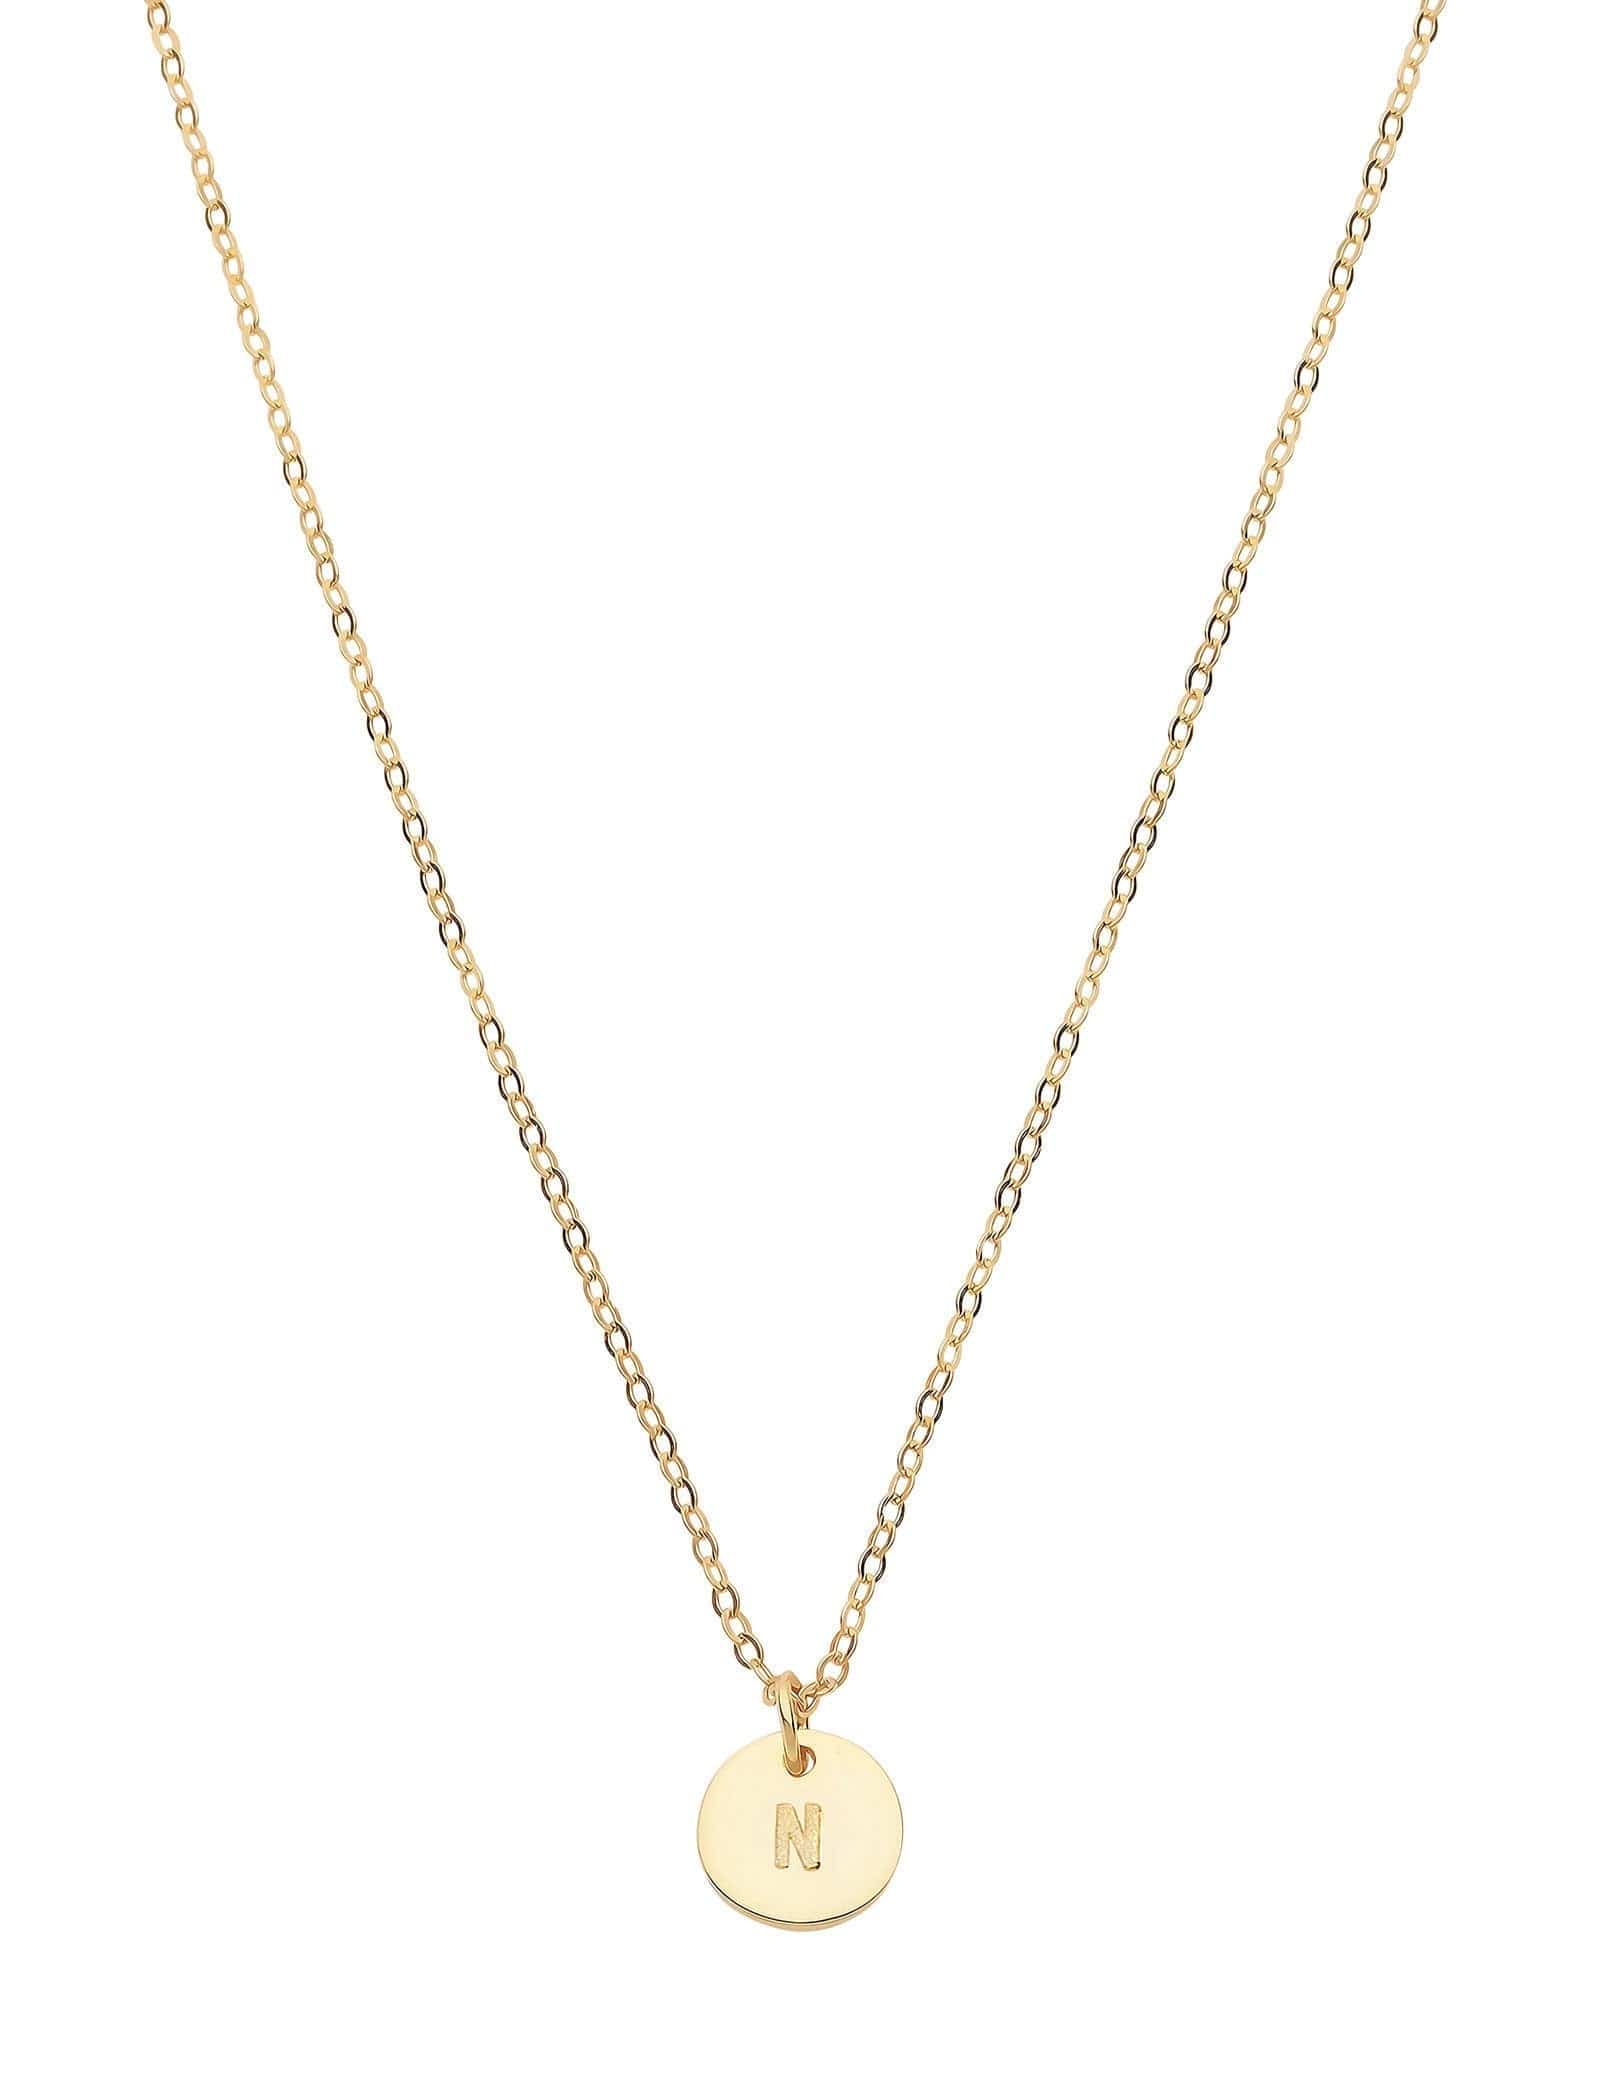 Dear Addison Yellow Gold Letter N Necklace